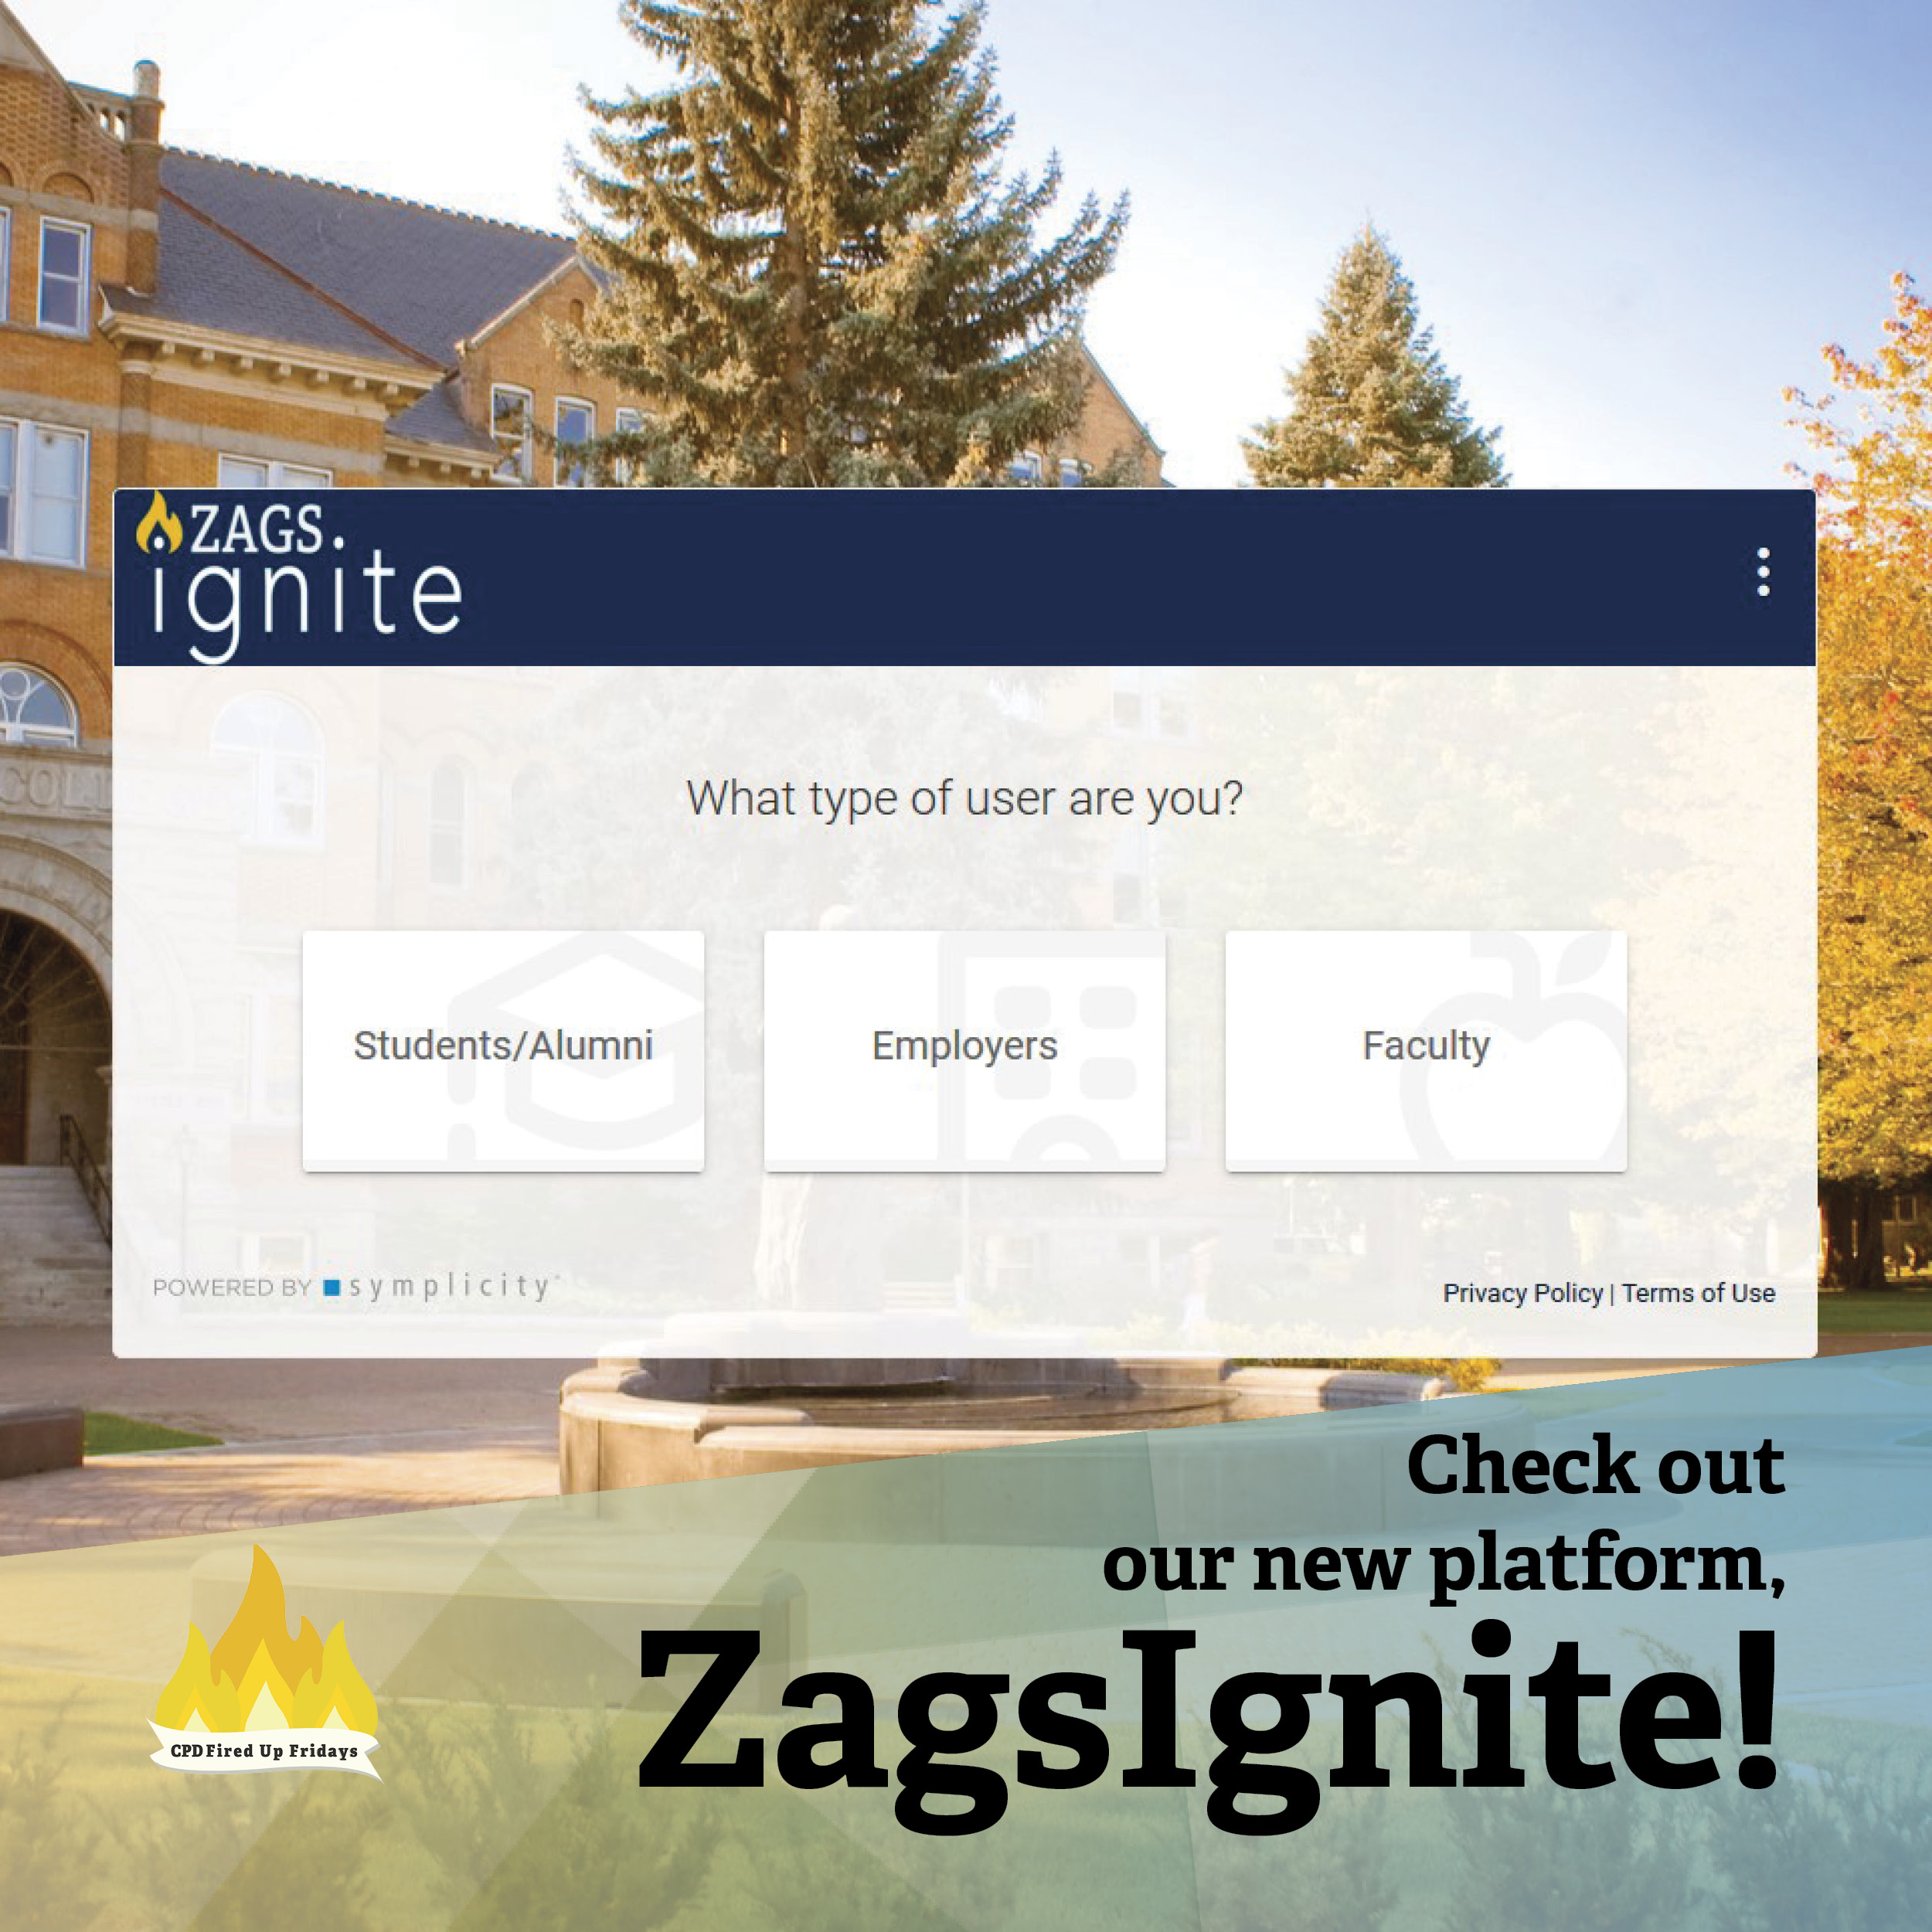 Screen capture photo of the homepage of ZagsIgnite, which shows the front of college hall and a menu asking for user type (Student/Alumni, Employer, or Faculty). Beneath the text reads: 